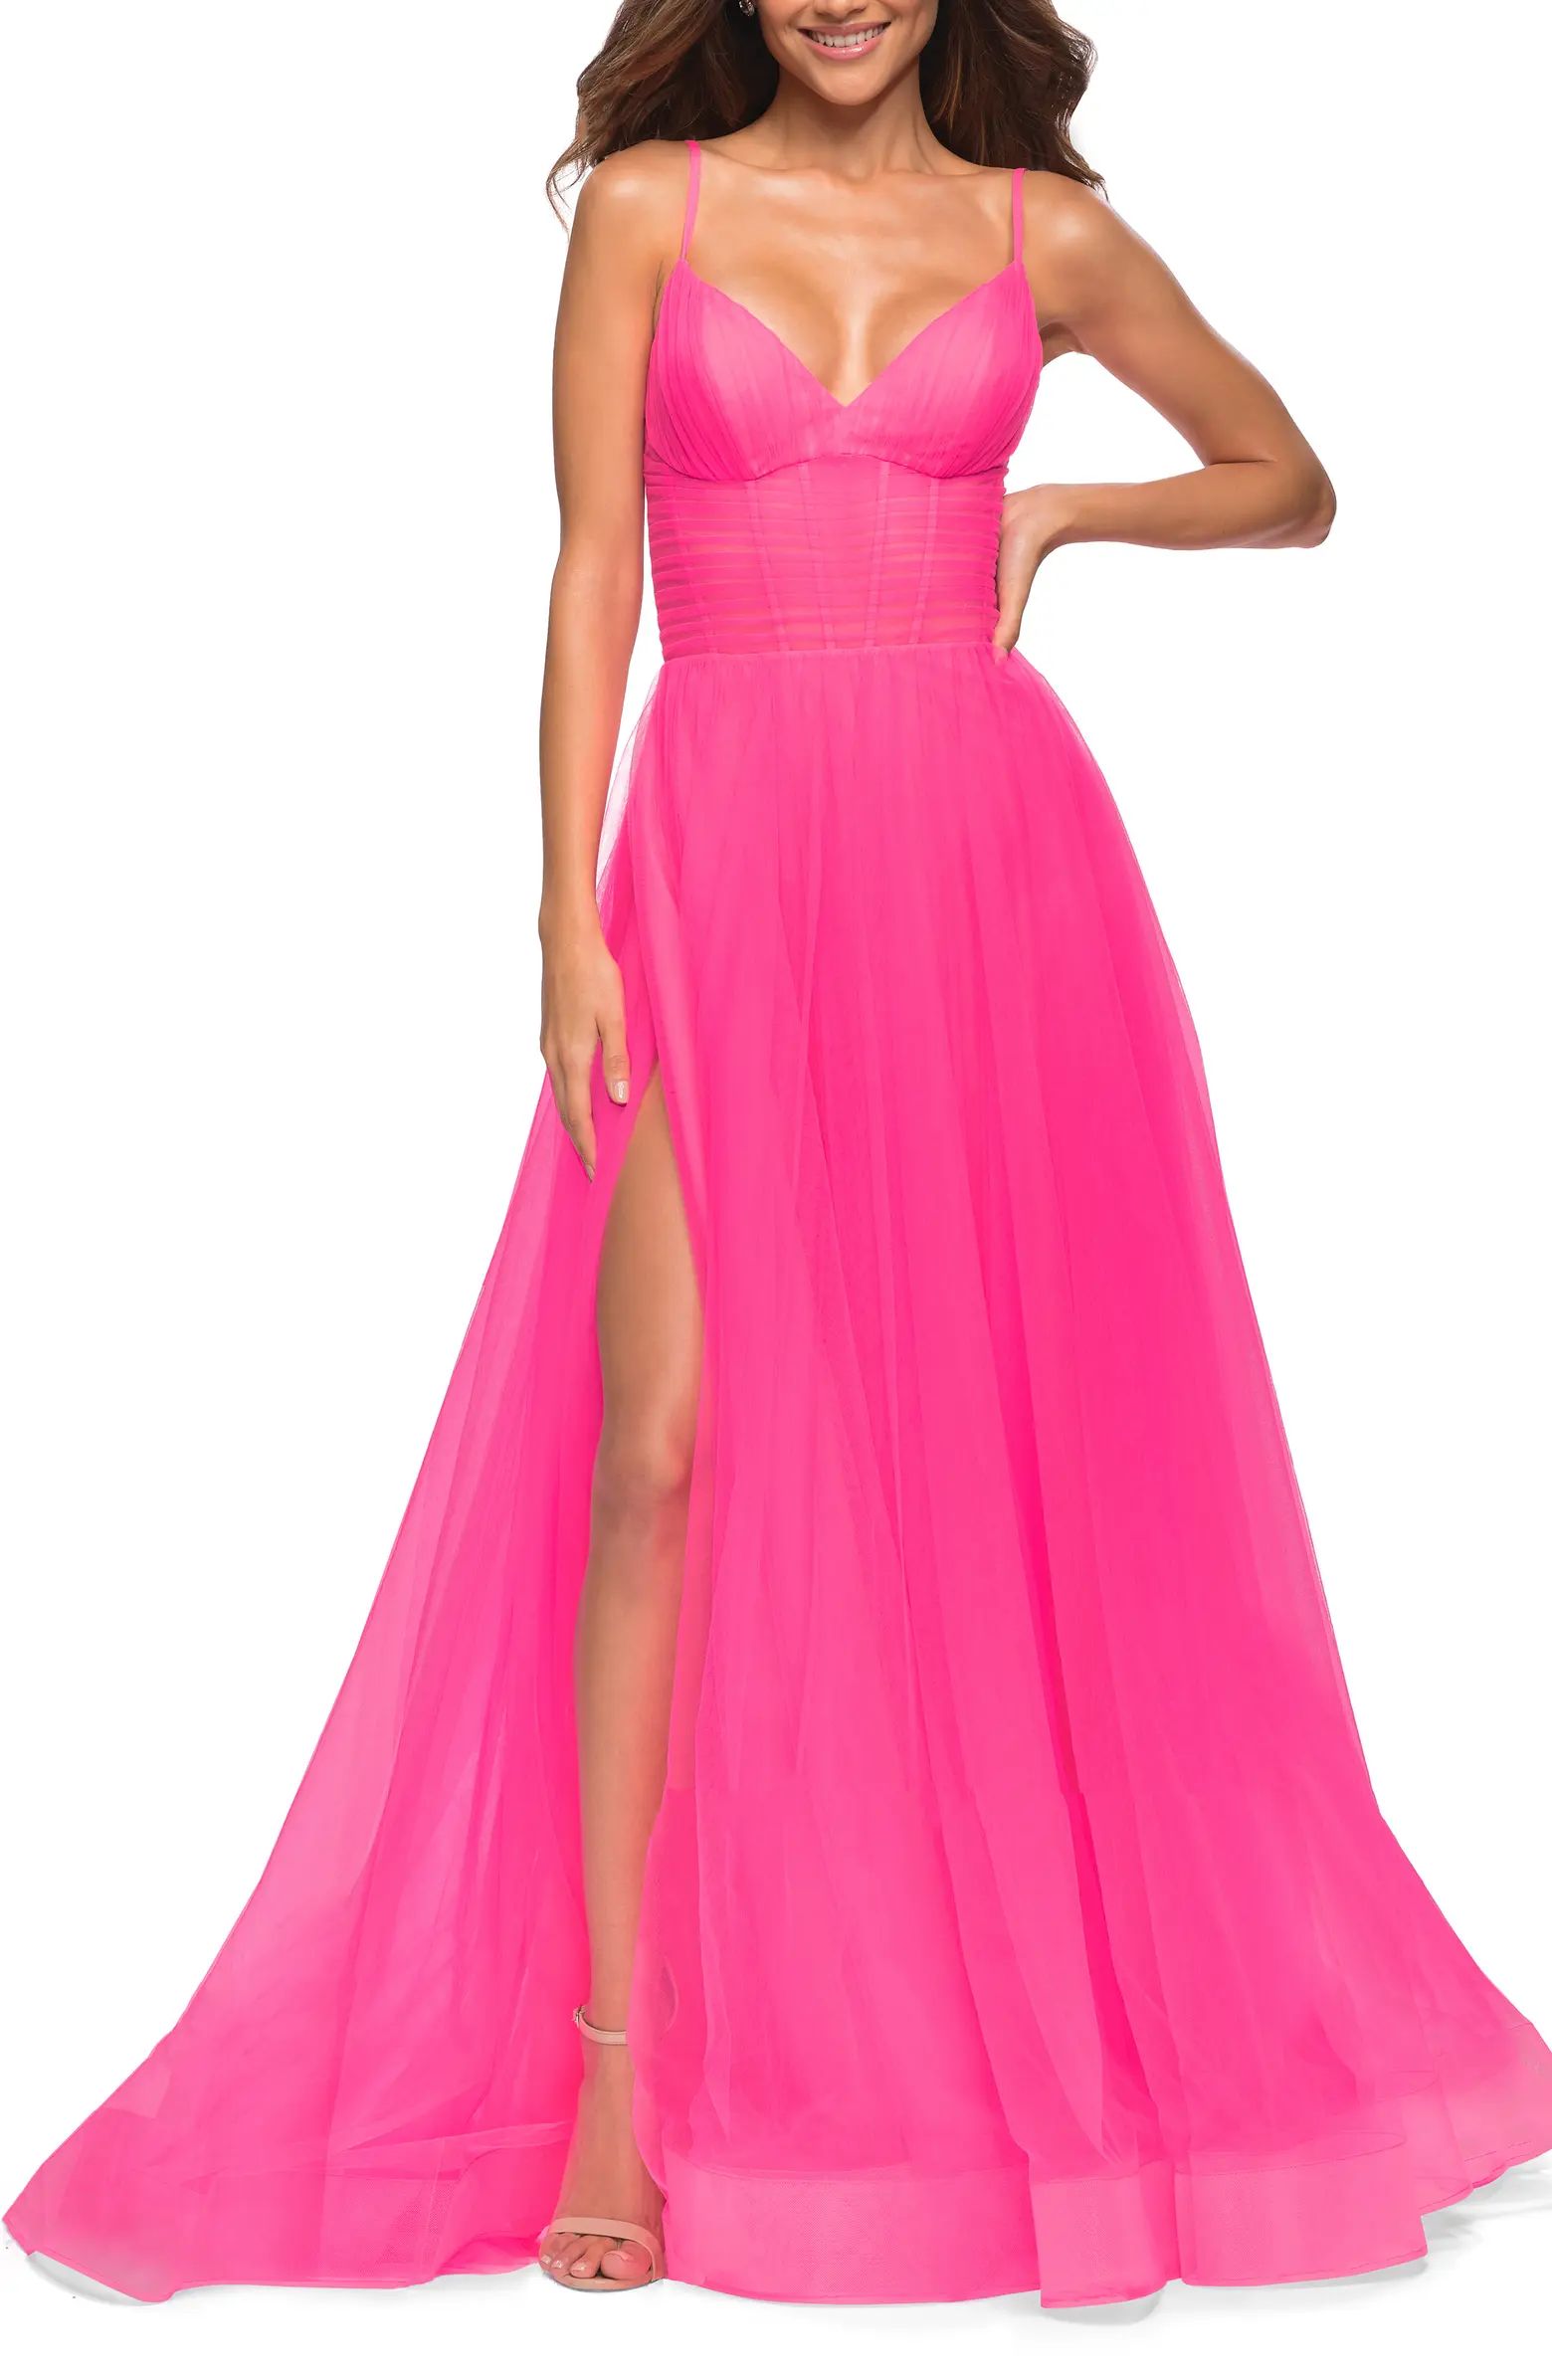 Exquisite Tulle A-Line Gown | Nordstrom